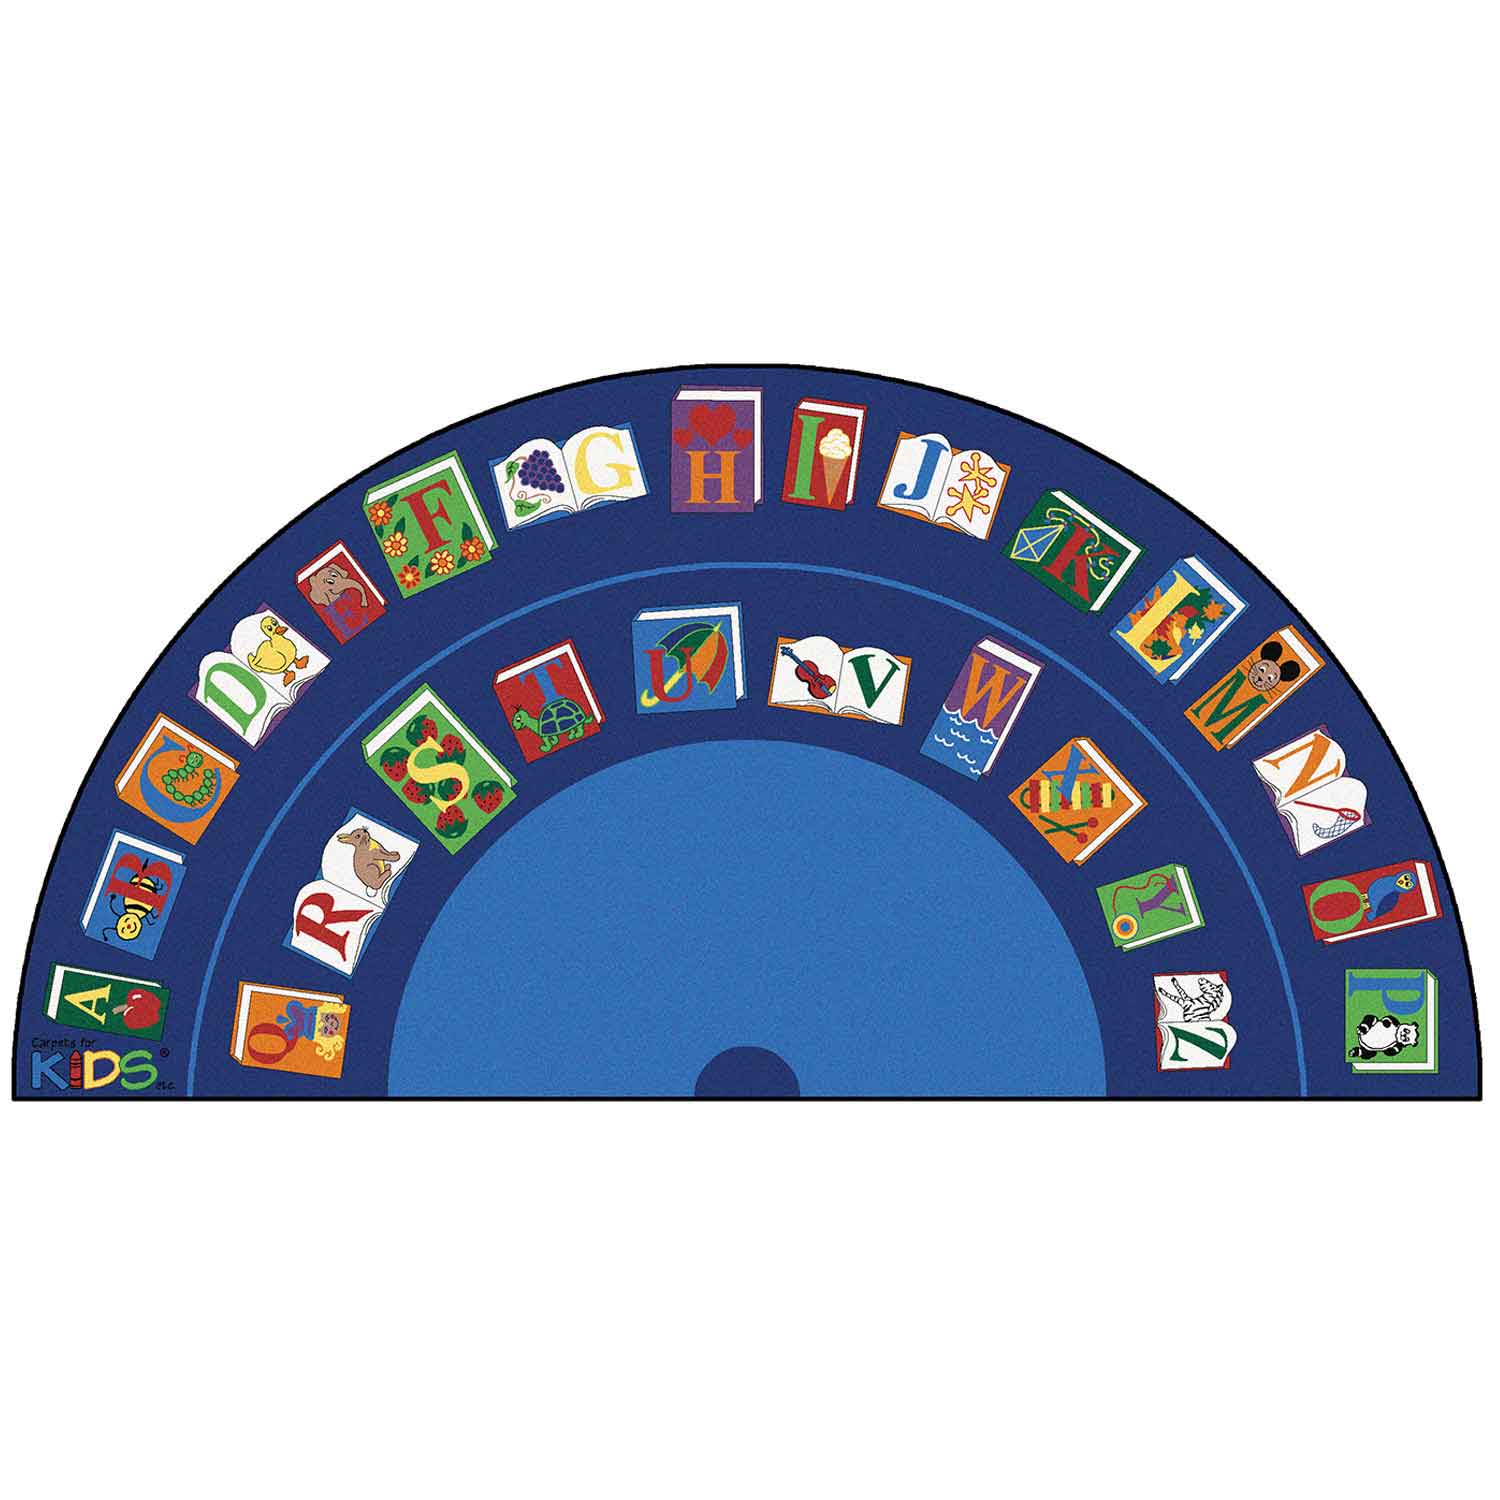 Reading By The Book Seating Classroom Rug, Semi-Circle 6'8" x 13'4"